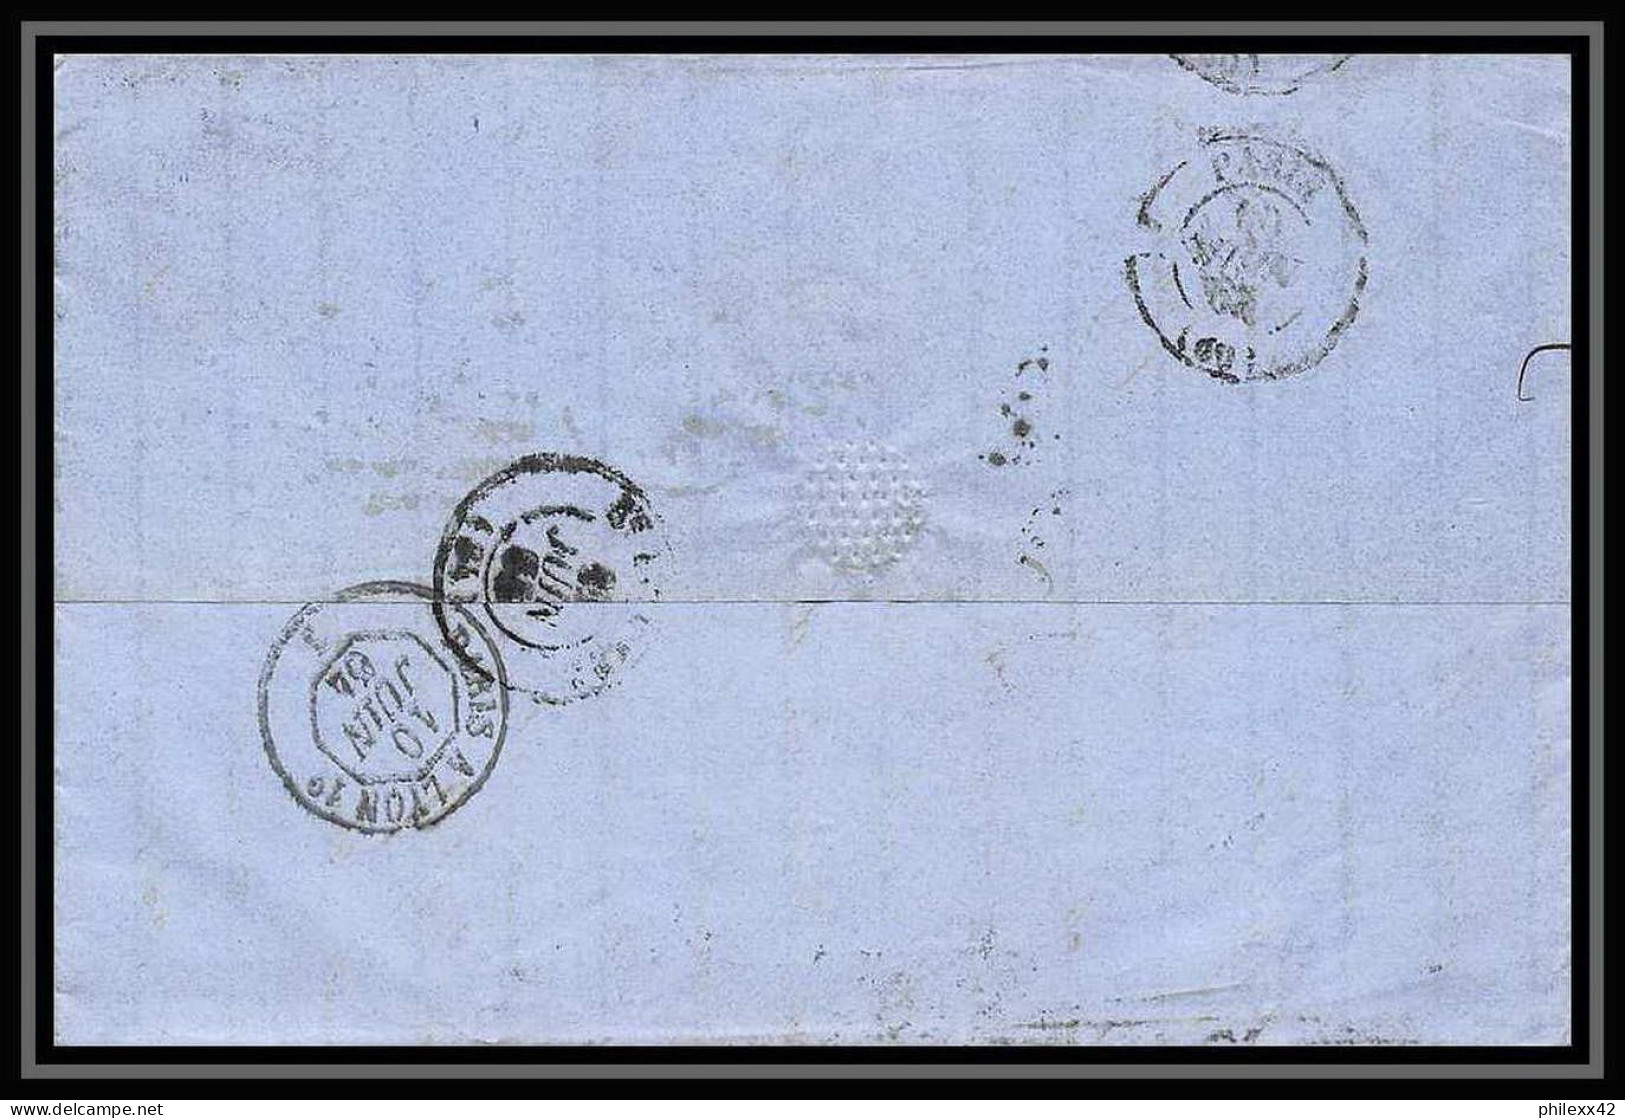 35793 N°32 Victoria 4p Red London St Etienne France 1864 Cachet 91 Lettre Cover Grande Bretagne England - Covers & Documents